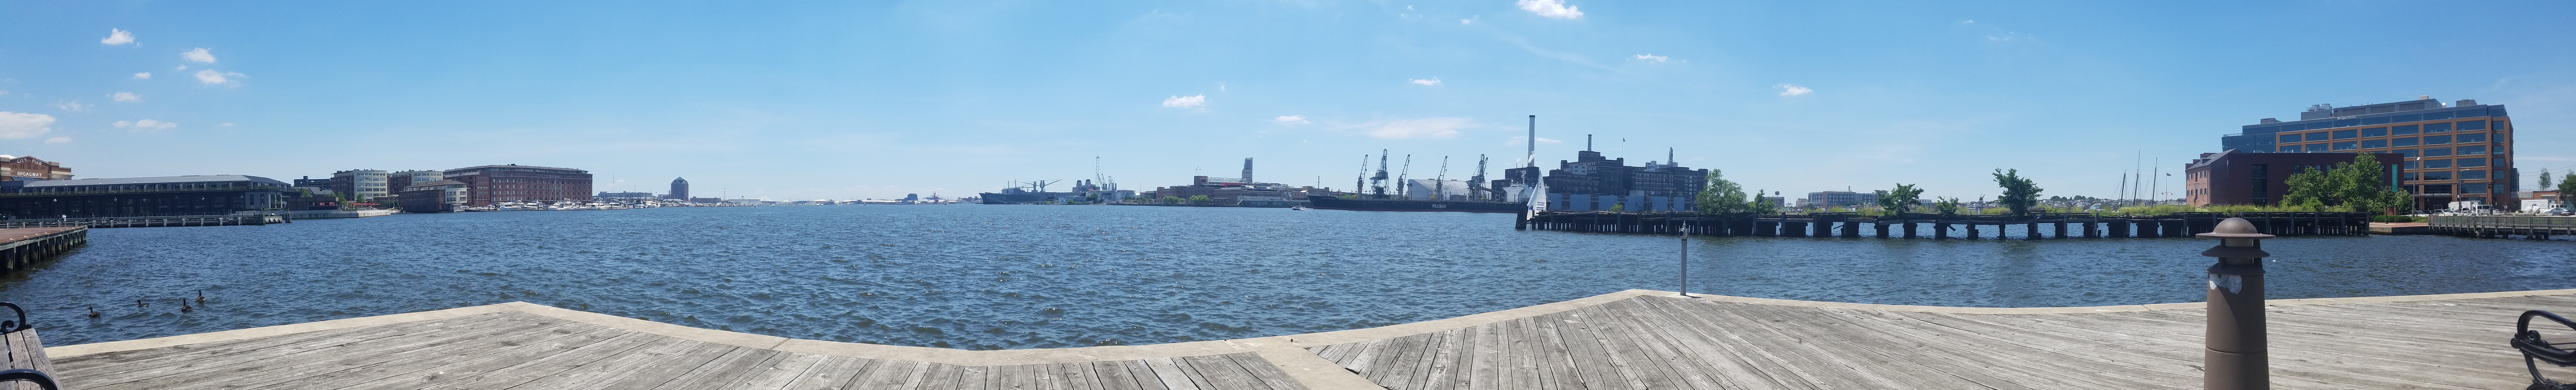 Baltimore Staycation: A Review